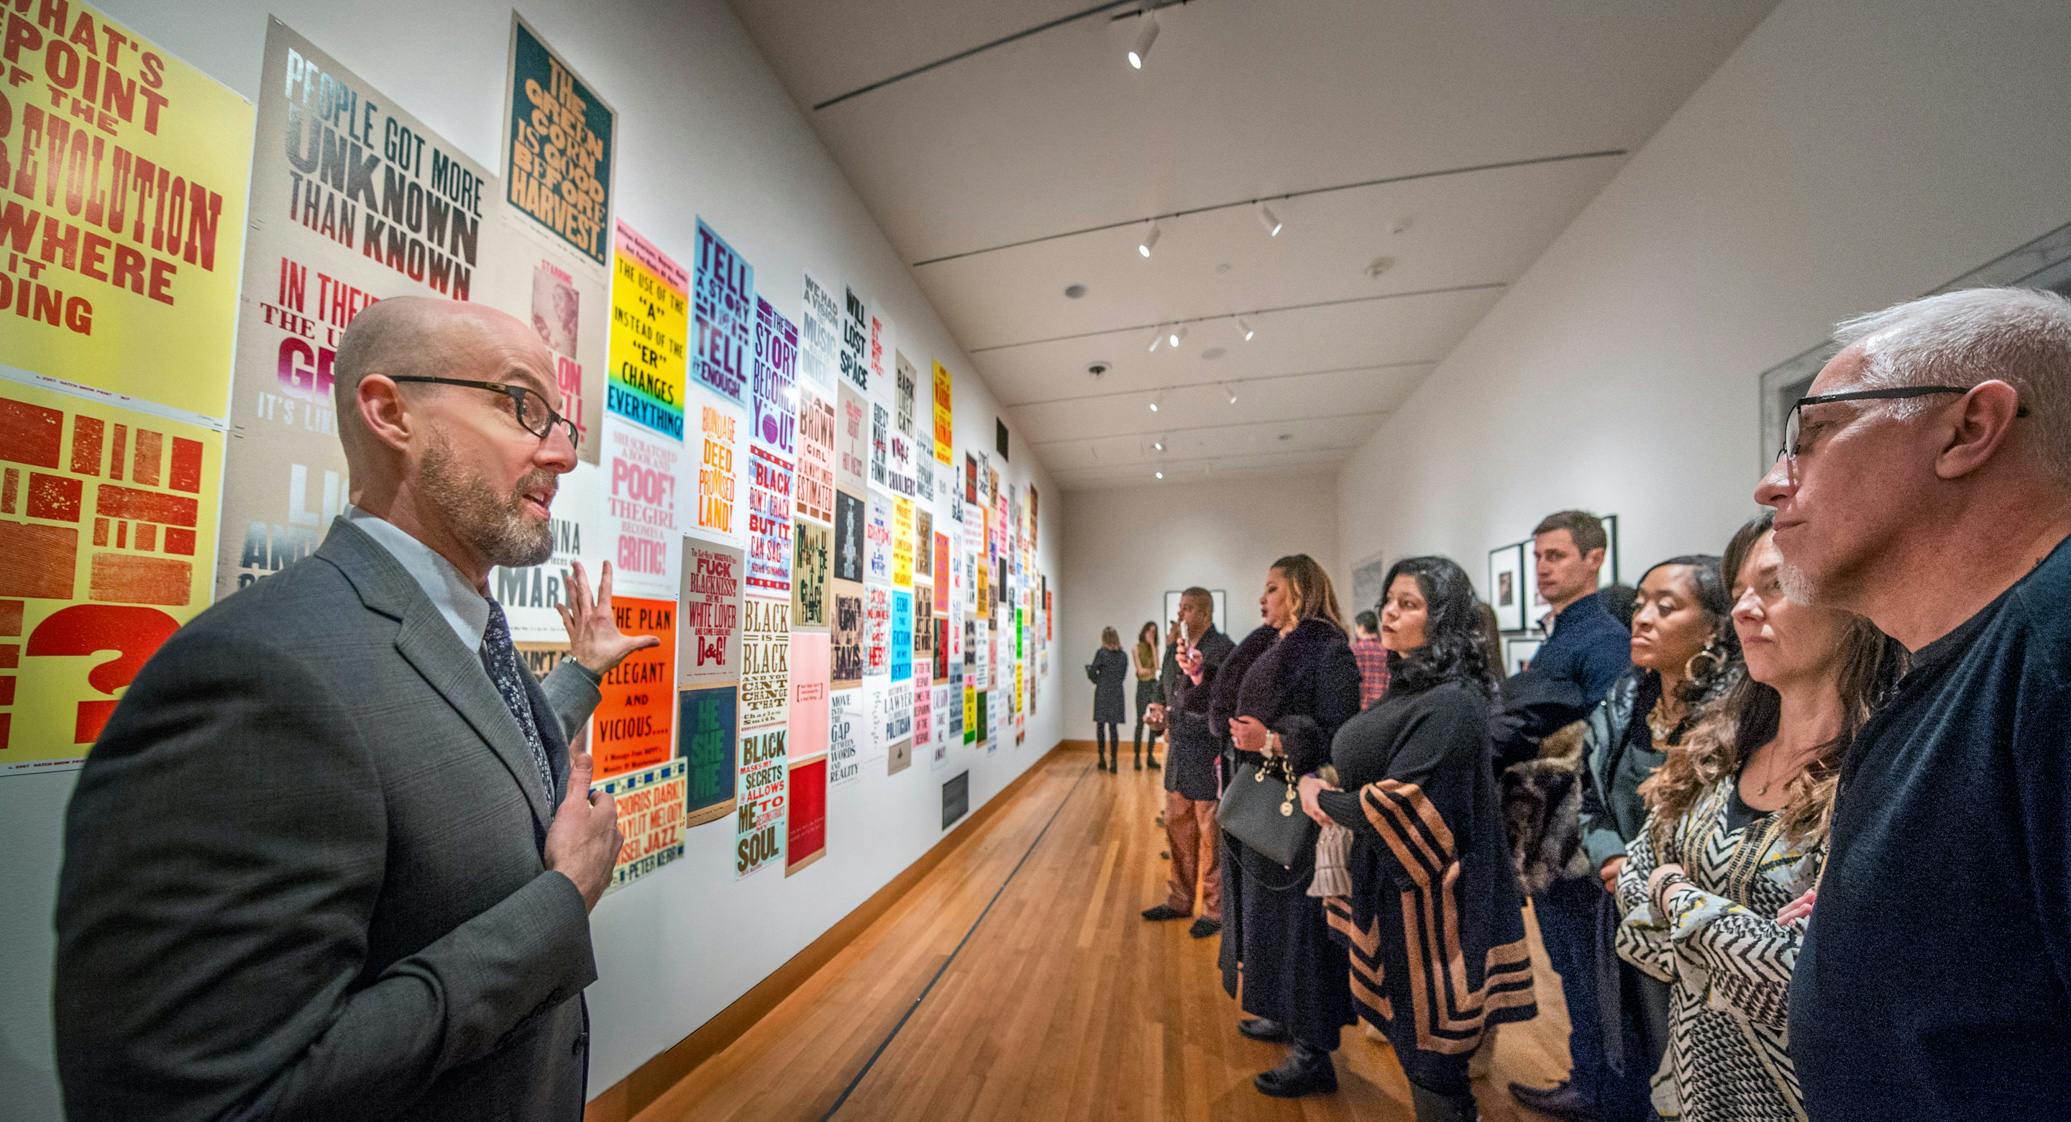 People in gallery listen to tour guide in front of wall covered in brightly colored graphic posters